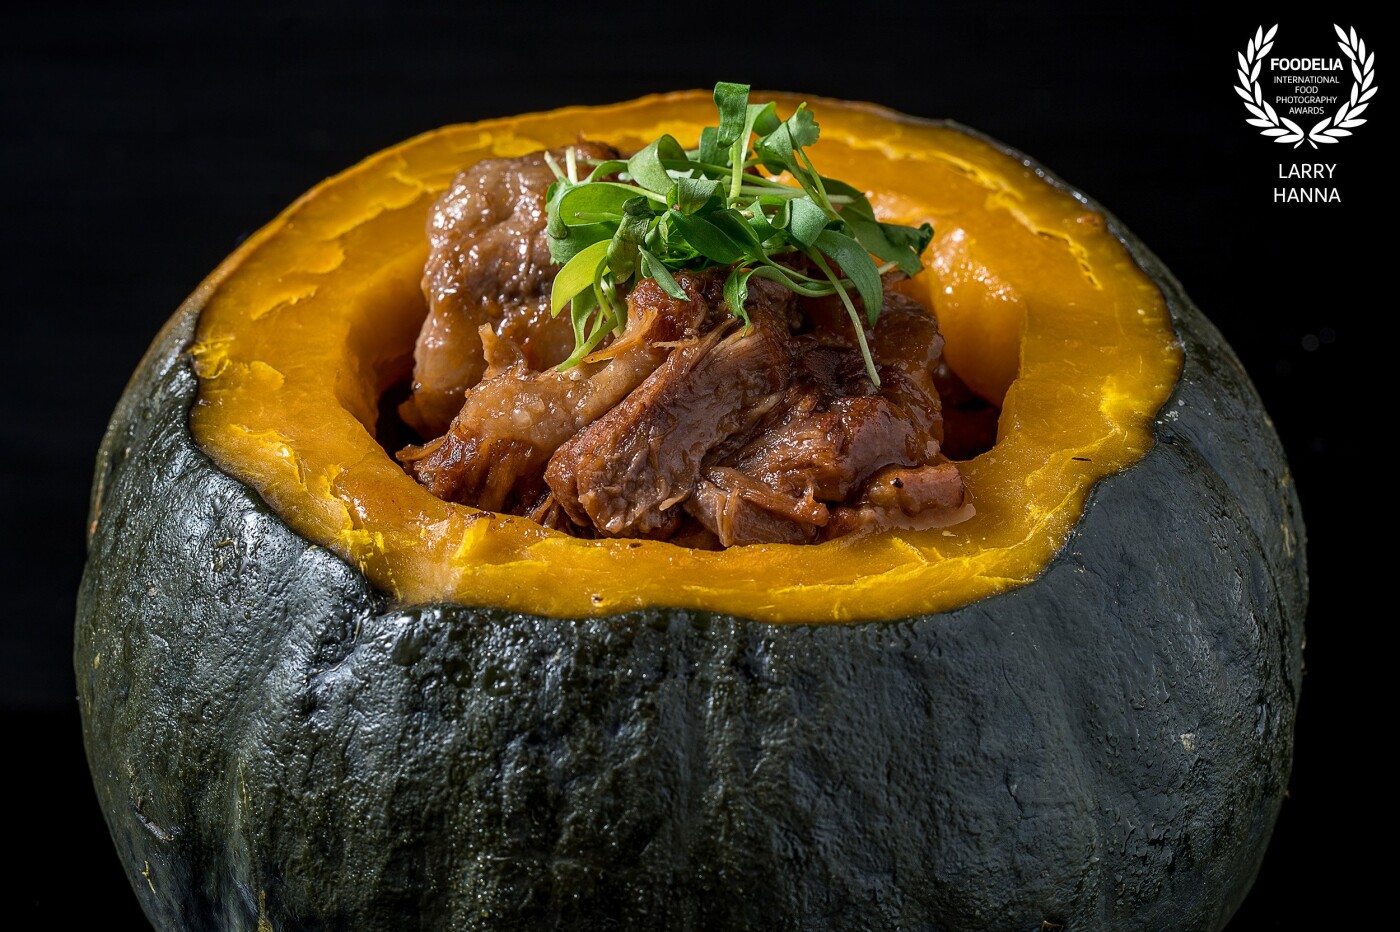 This is oxbow soup in a carved out squash photographed on location for a restaurant in a Las Vegas Casino Hotel.  The creation was styled by food stylist  Amy Villareale.